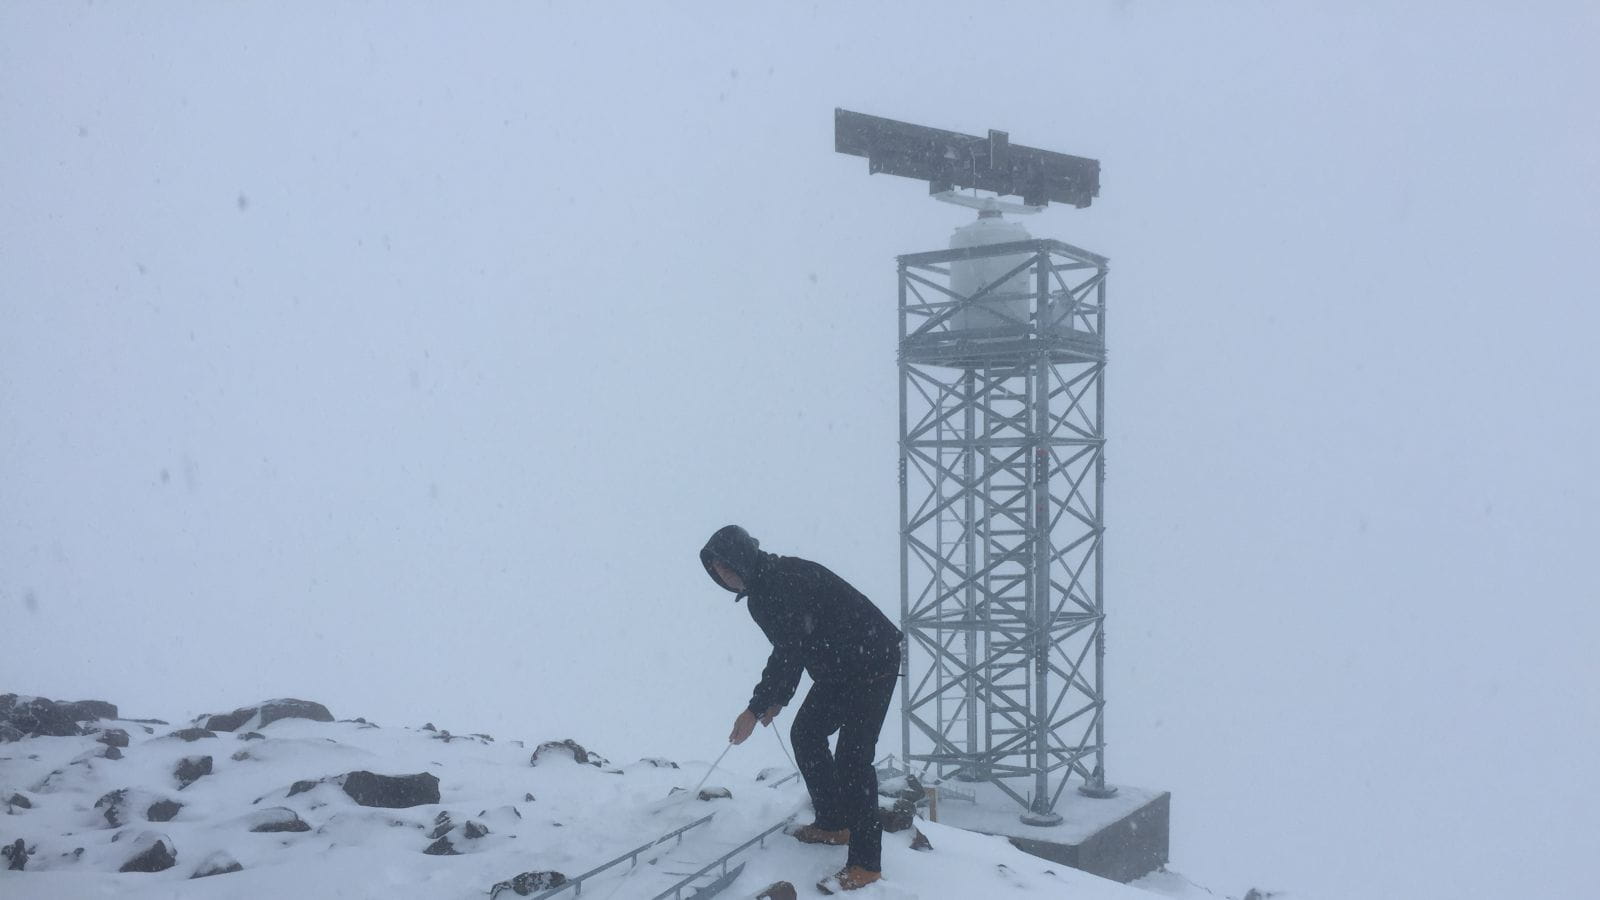 This engineer works on top of a Norwegian mountain to install the Condor MK3 next-gen radar.